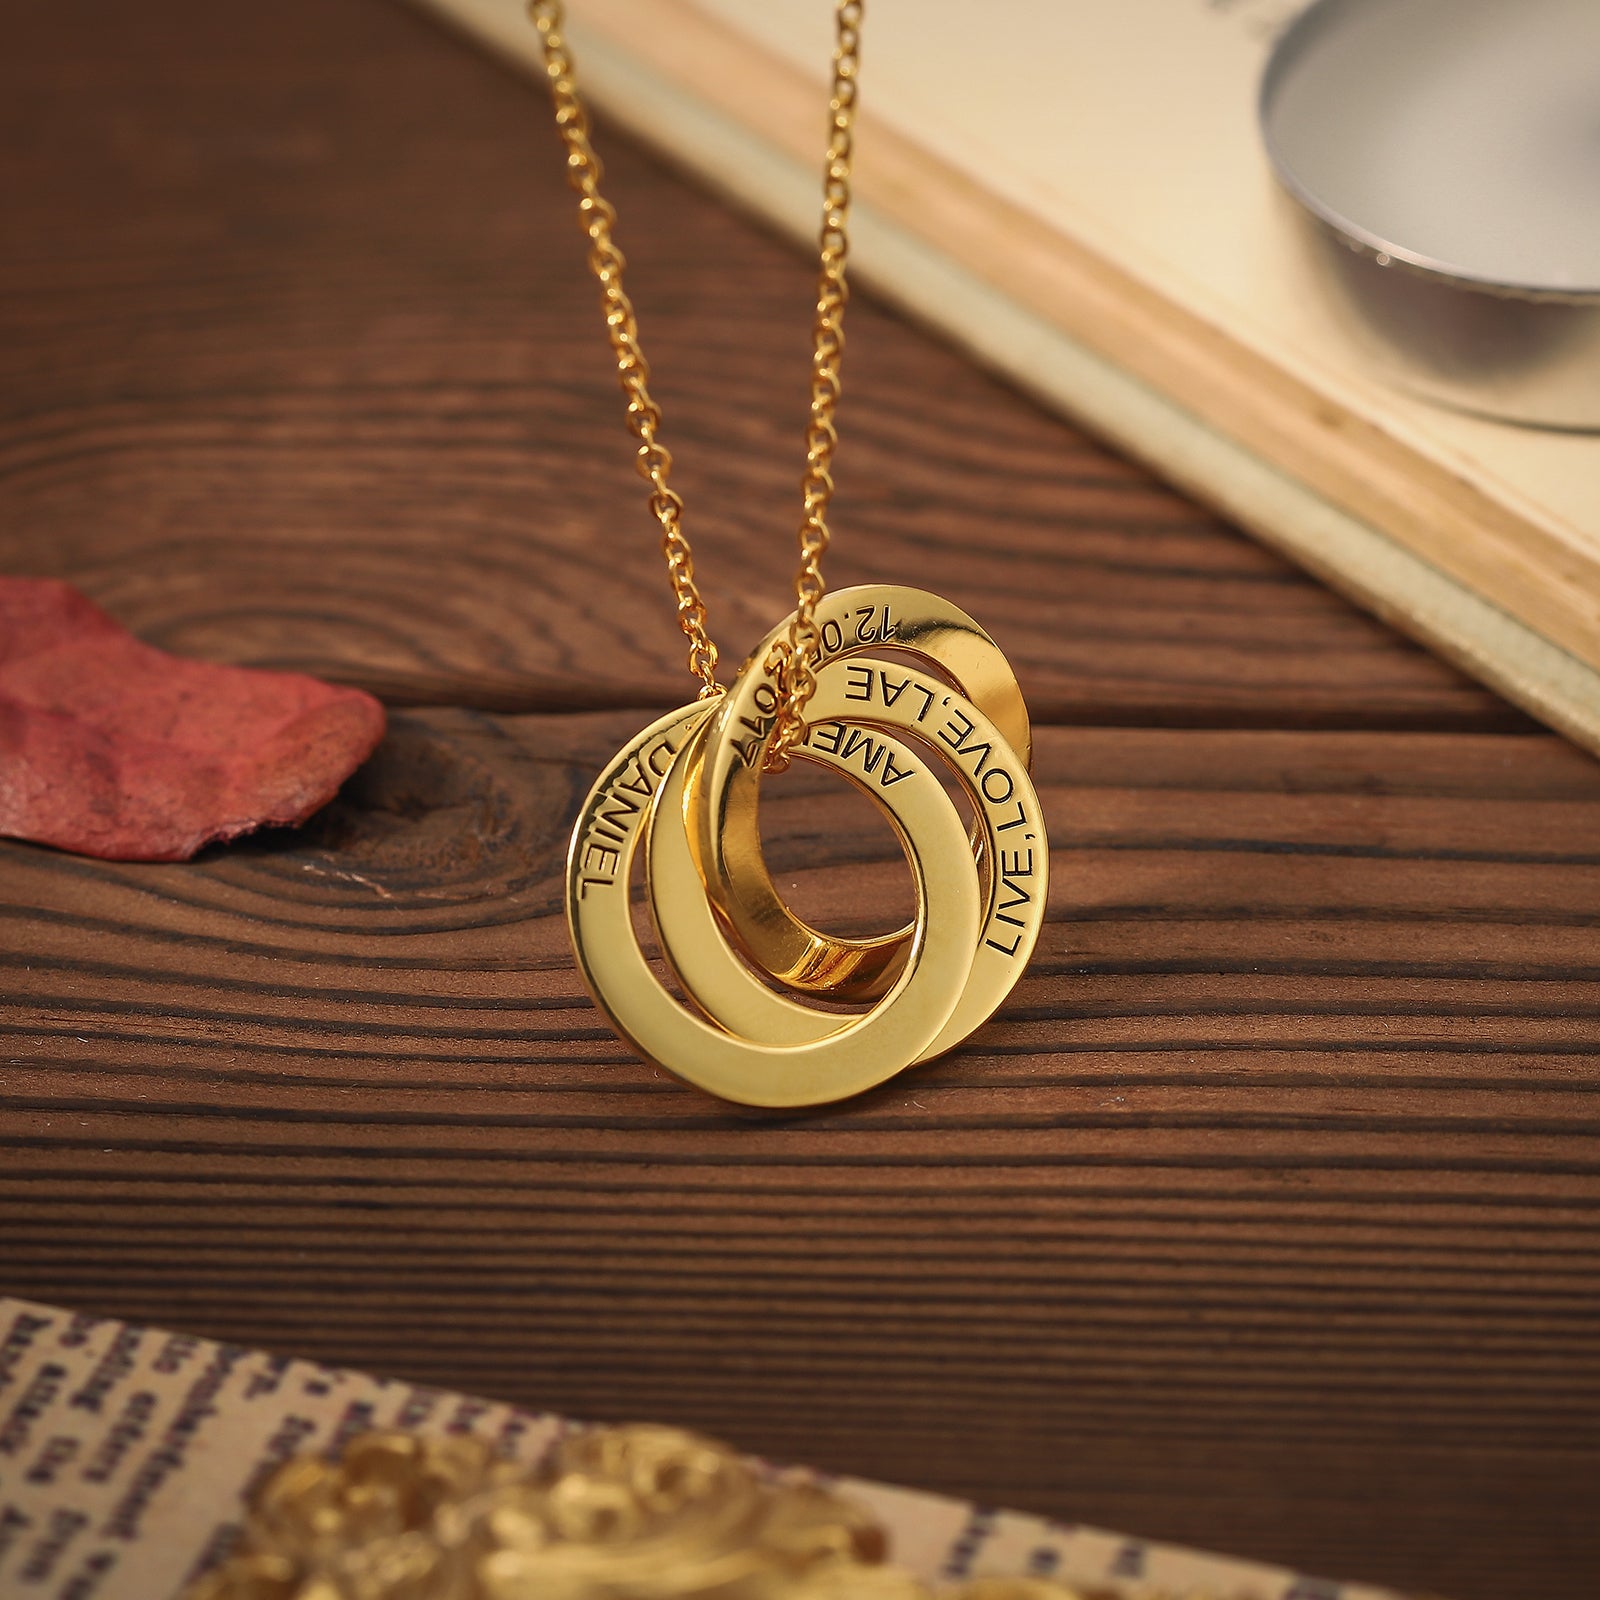 Customized Interlink Circles Name Necklace